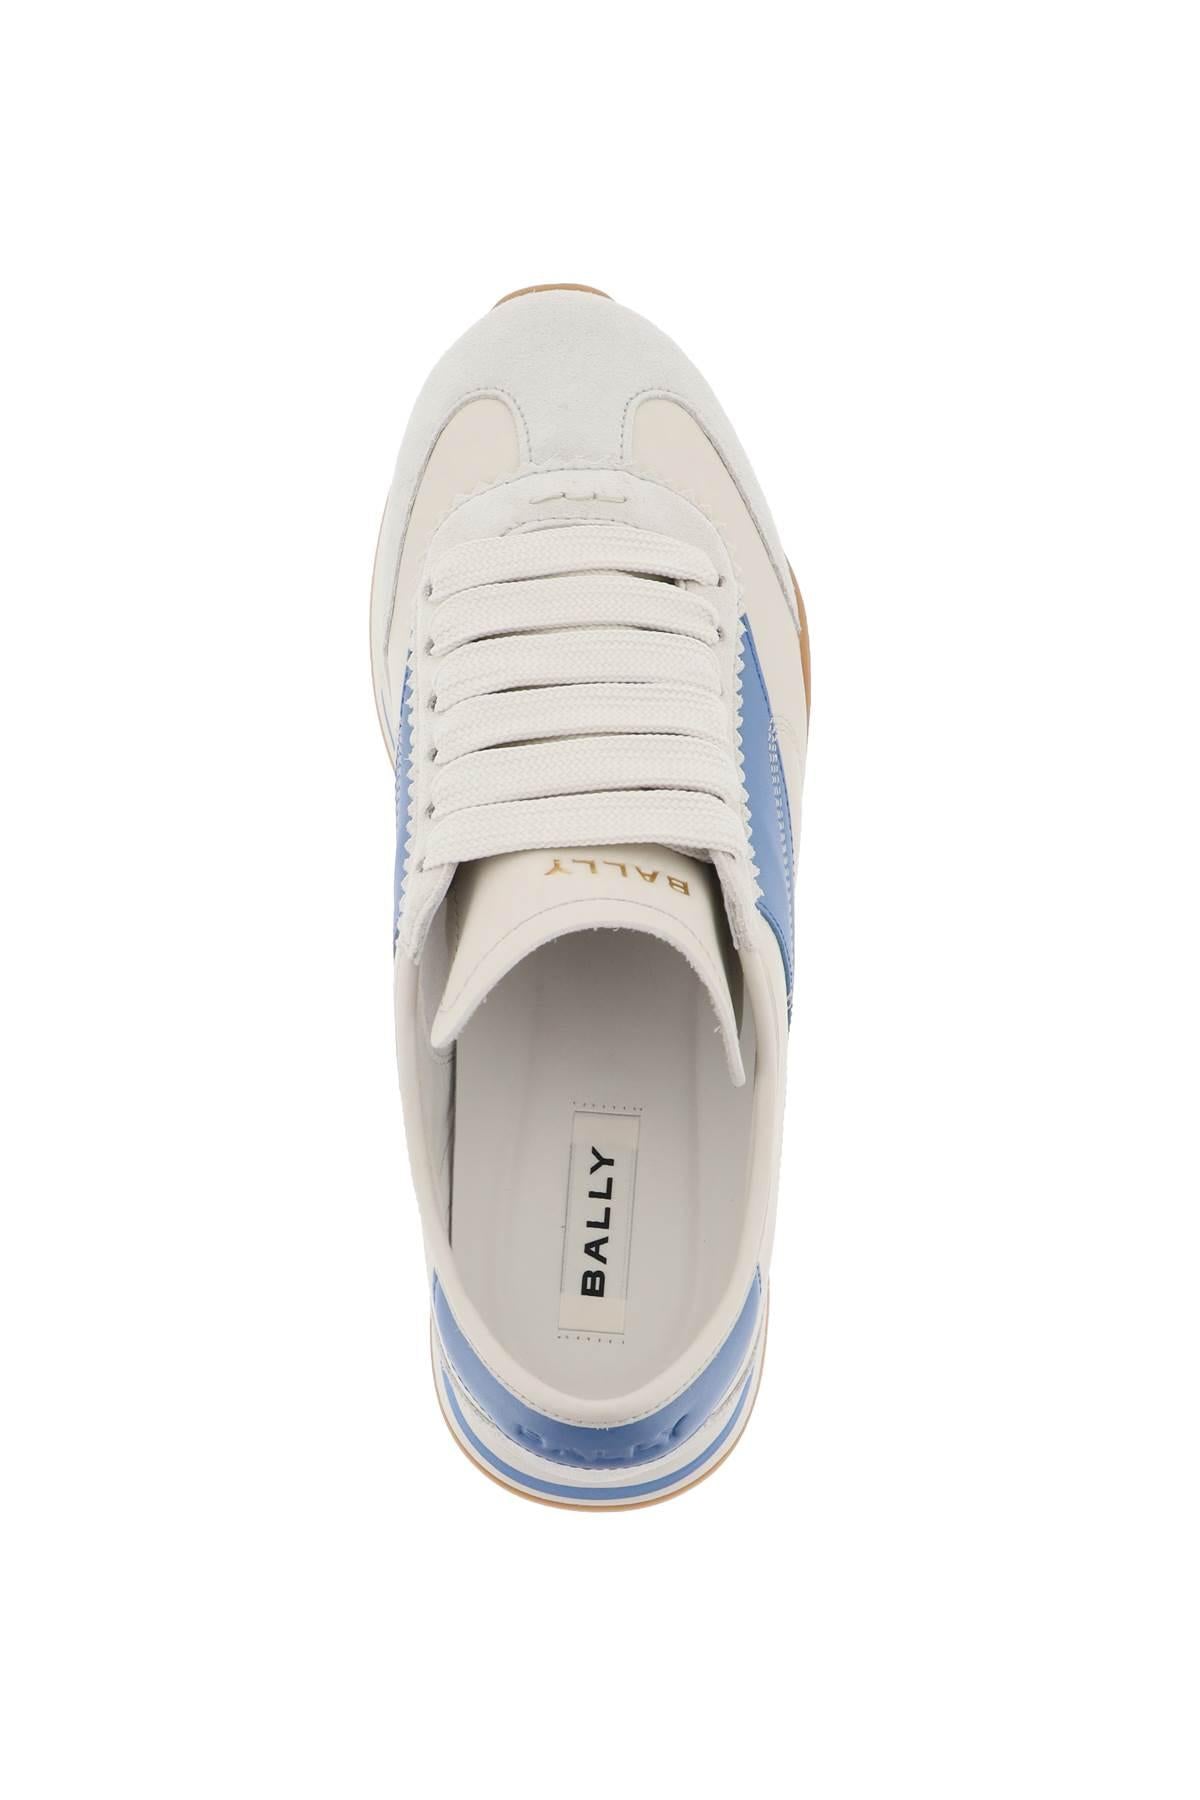 BALLY Hedern Leather High Top Sneaker – OZNICO